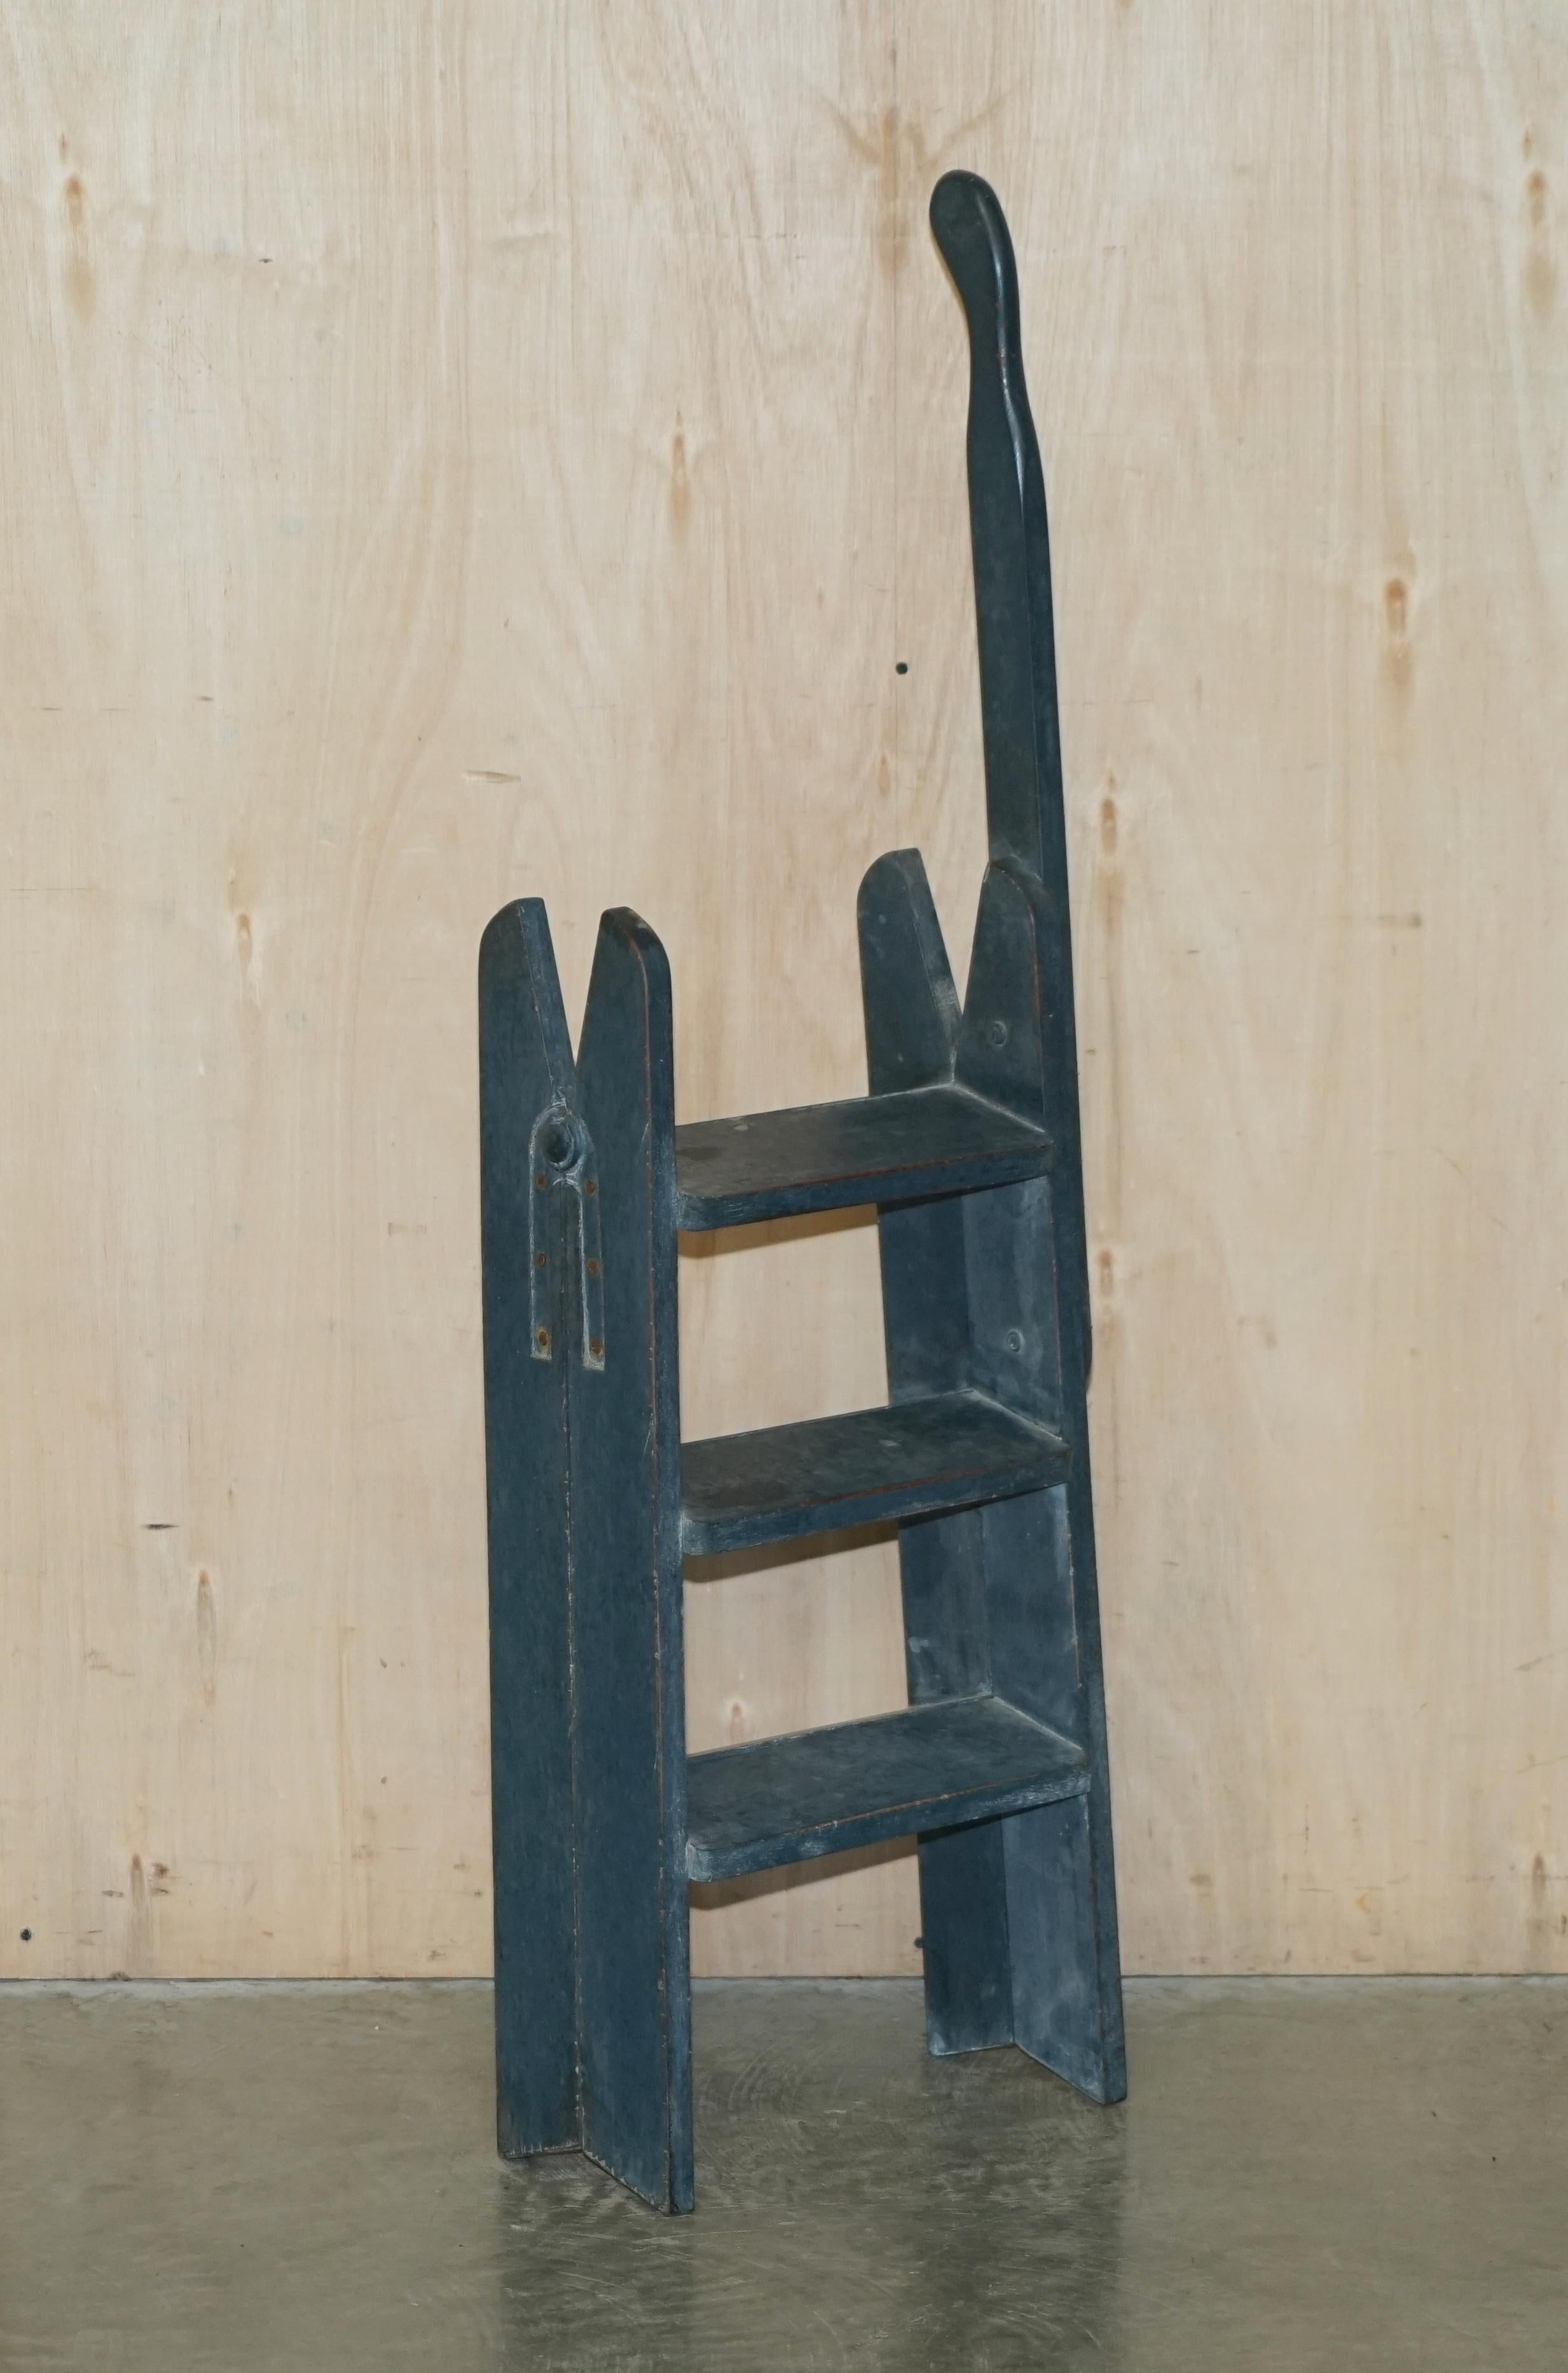 Royal House Antiques

Royal House Antiques is delighted to offer for sale this lovely original pine library steps or ladder to sit next to a bookcase

A good looking and decorative piece with a lovely antique blue paint. These are foldable and